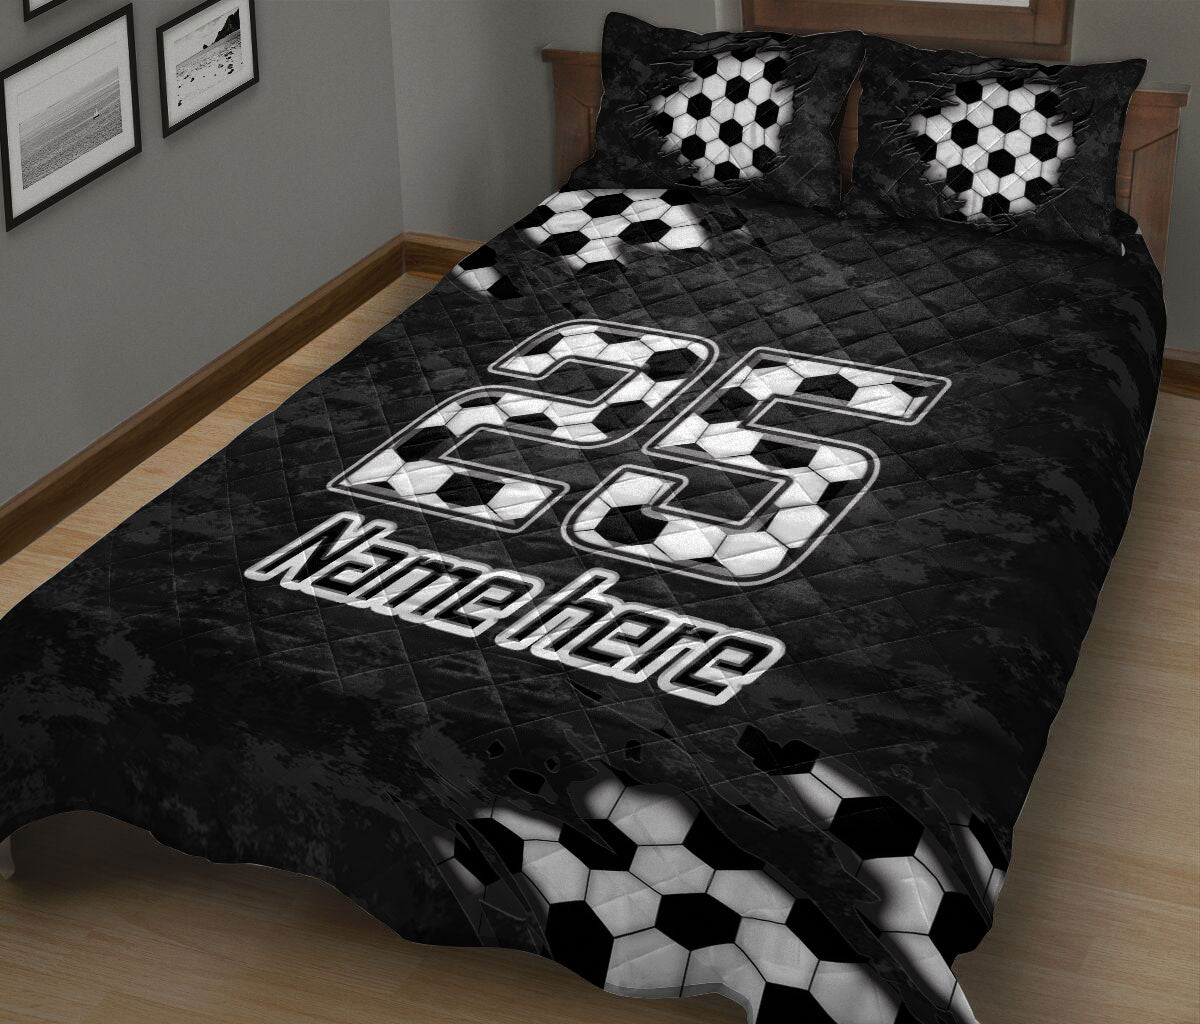 Ohaprints-Quilt-Bed-Set-Pillowcase-Soccer-Sport-B&W-Ball-Pattern-Black-Camo-Custom-Personalized-Name-Number-Blanket-Bedspread-Bedding-919-King (90'' x 100'')